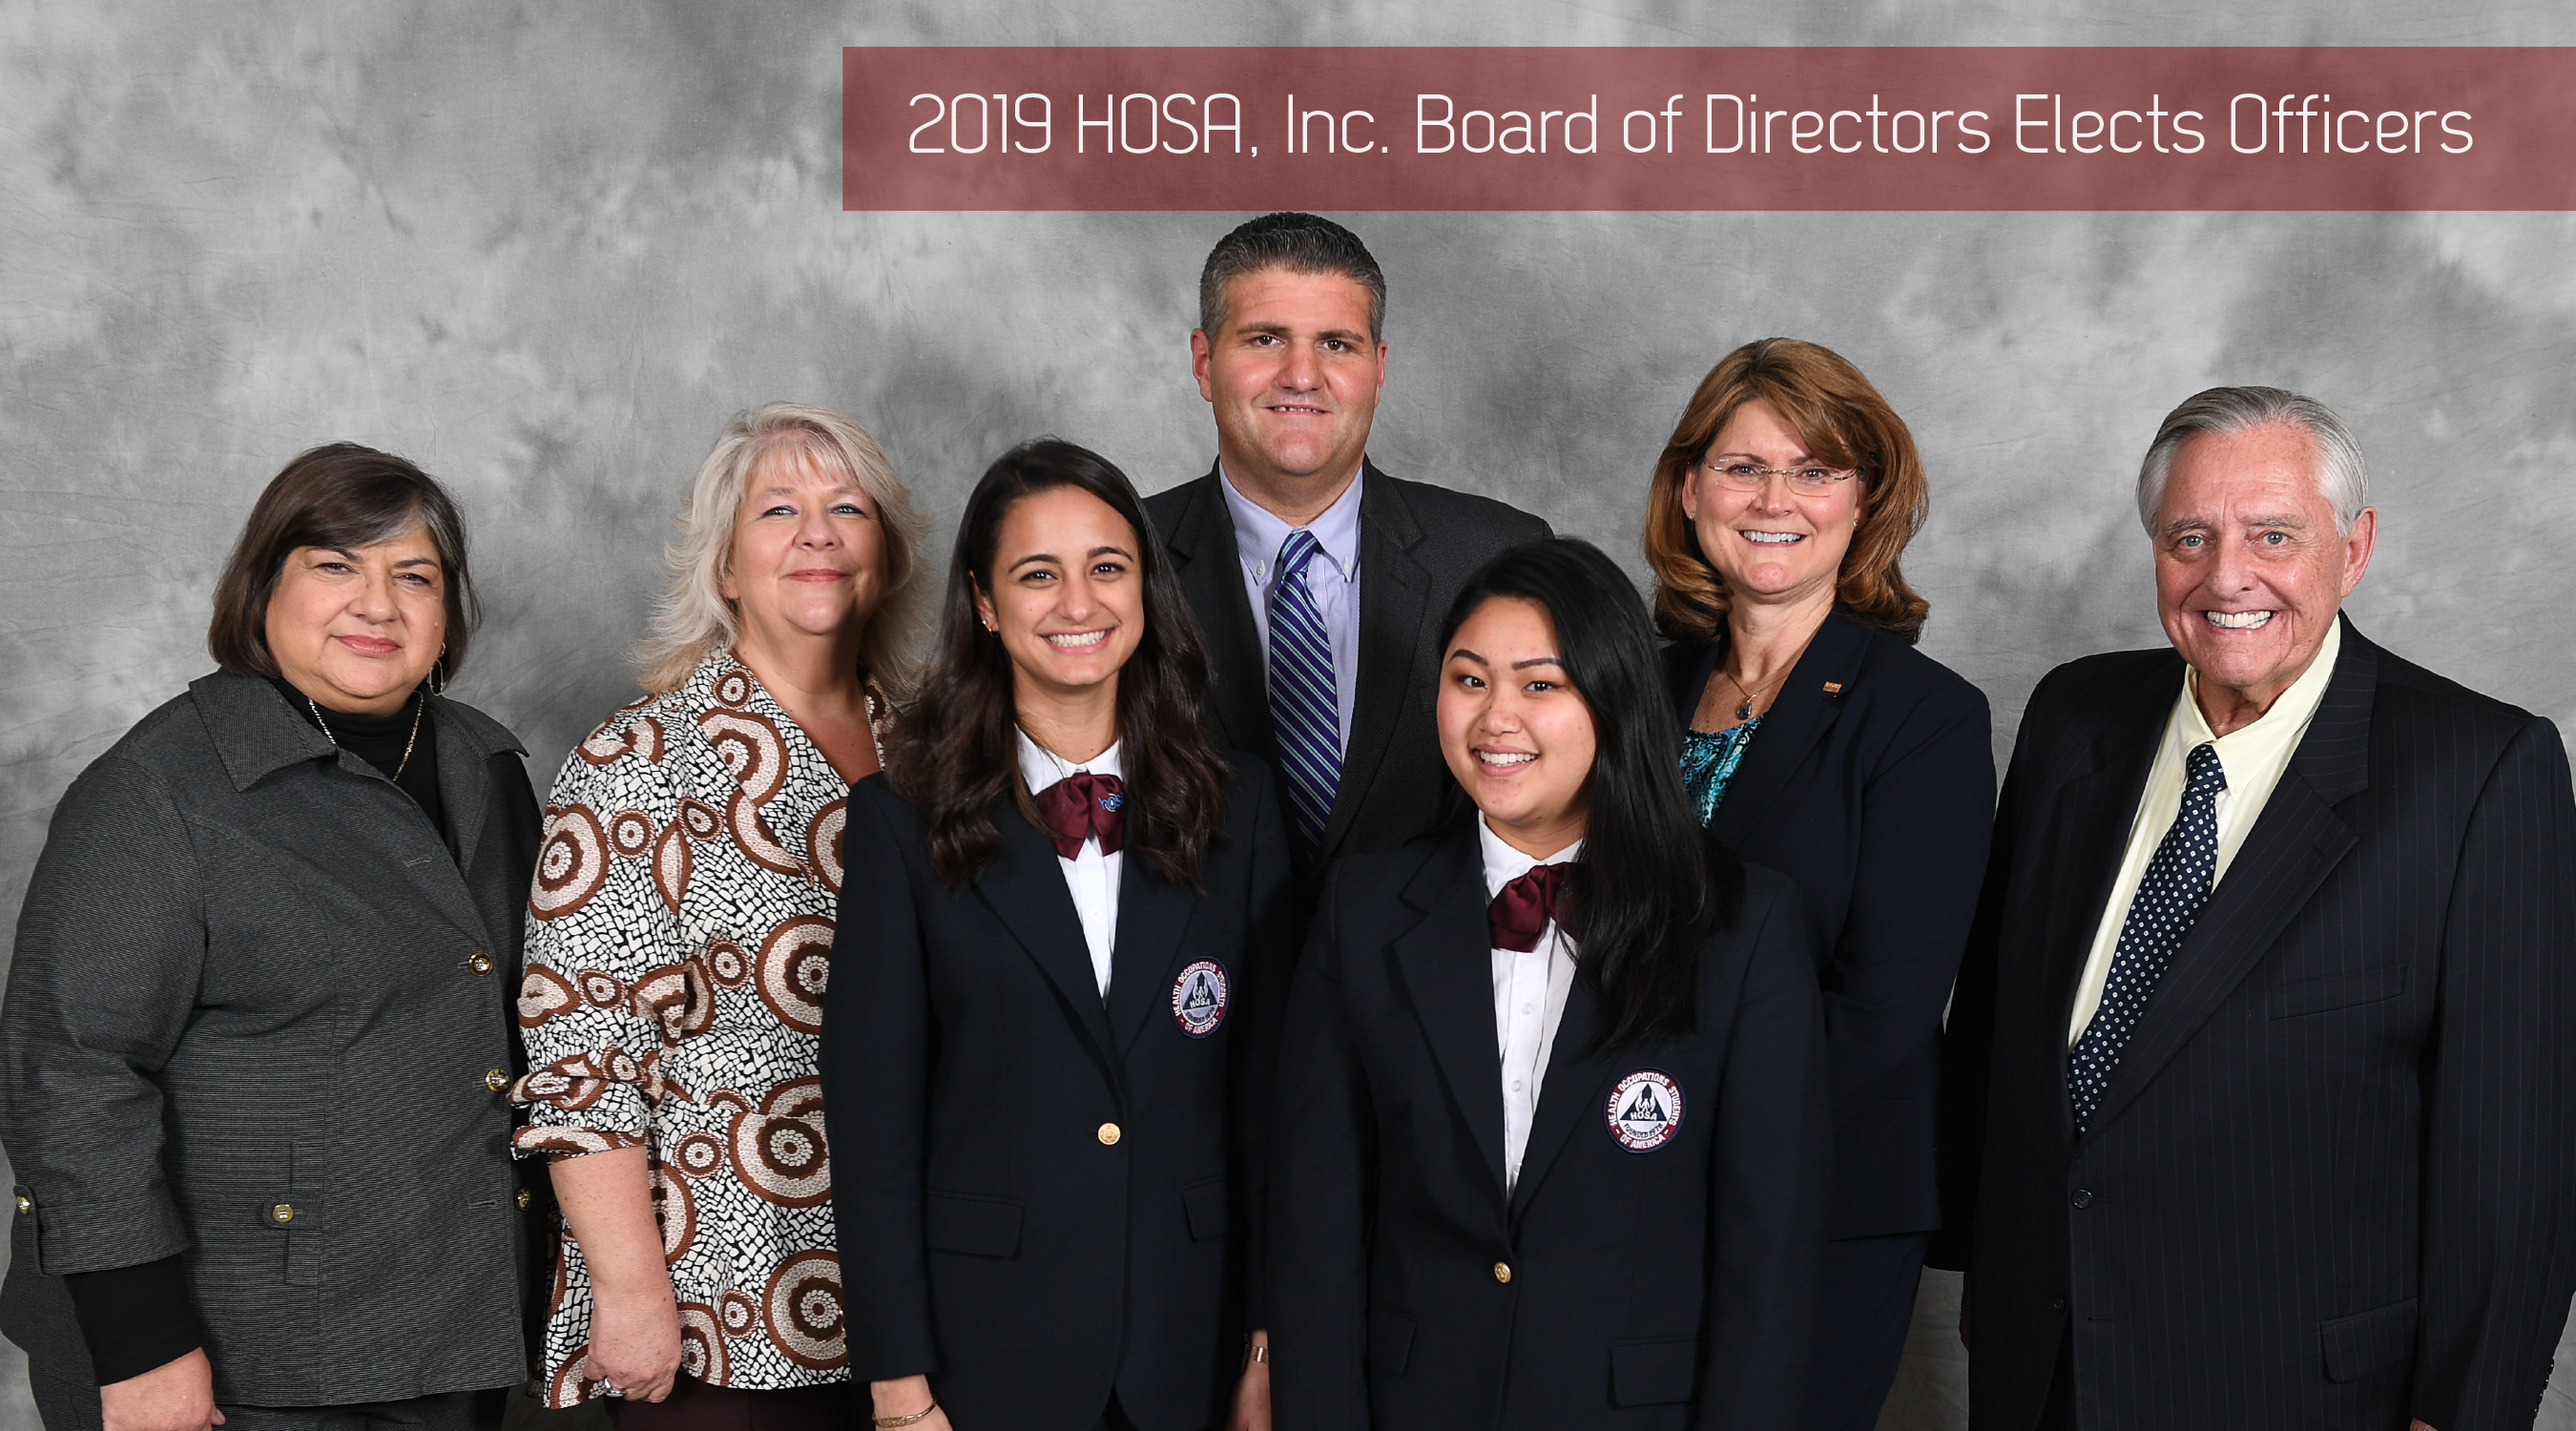 2019 HOSA, Inc. Board of Directors Elects Officers